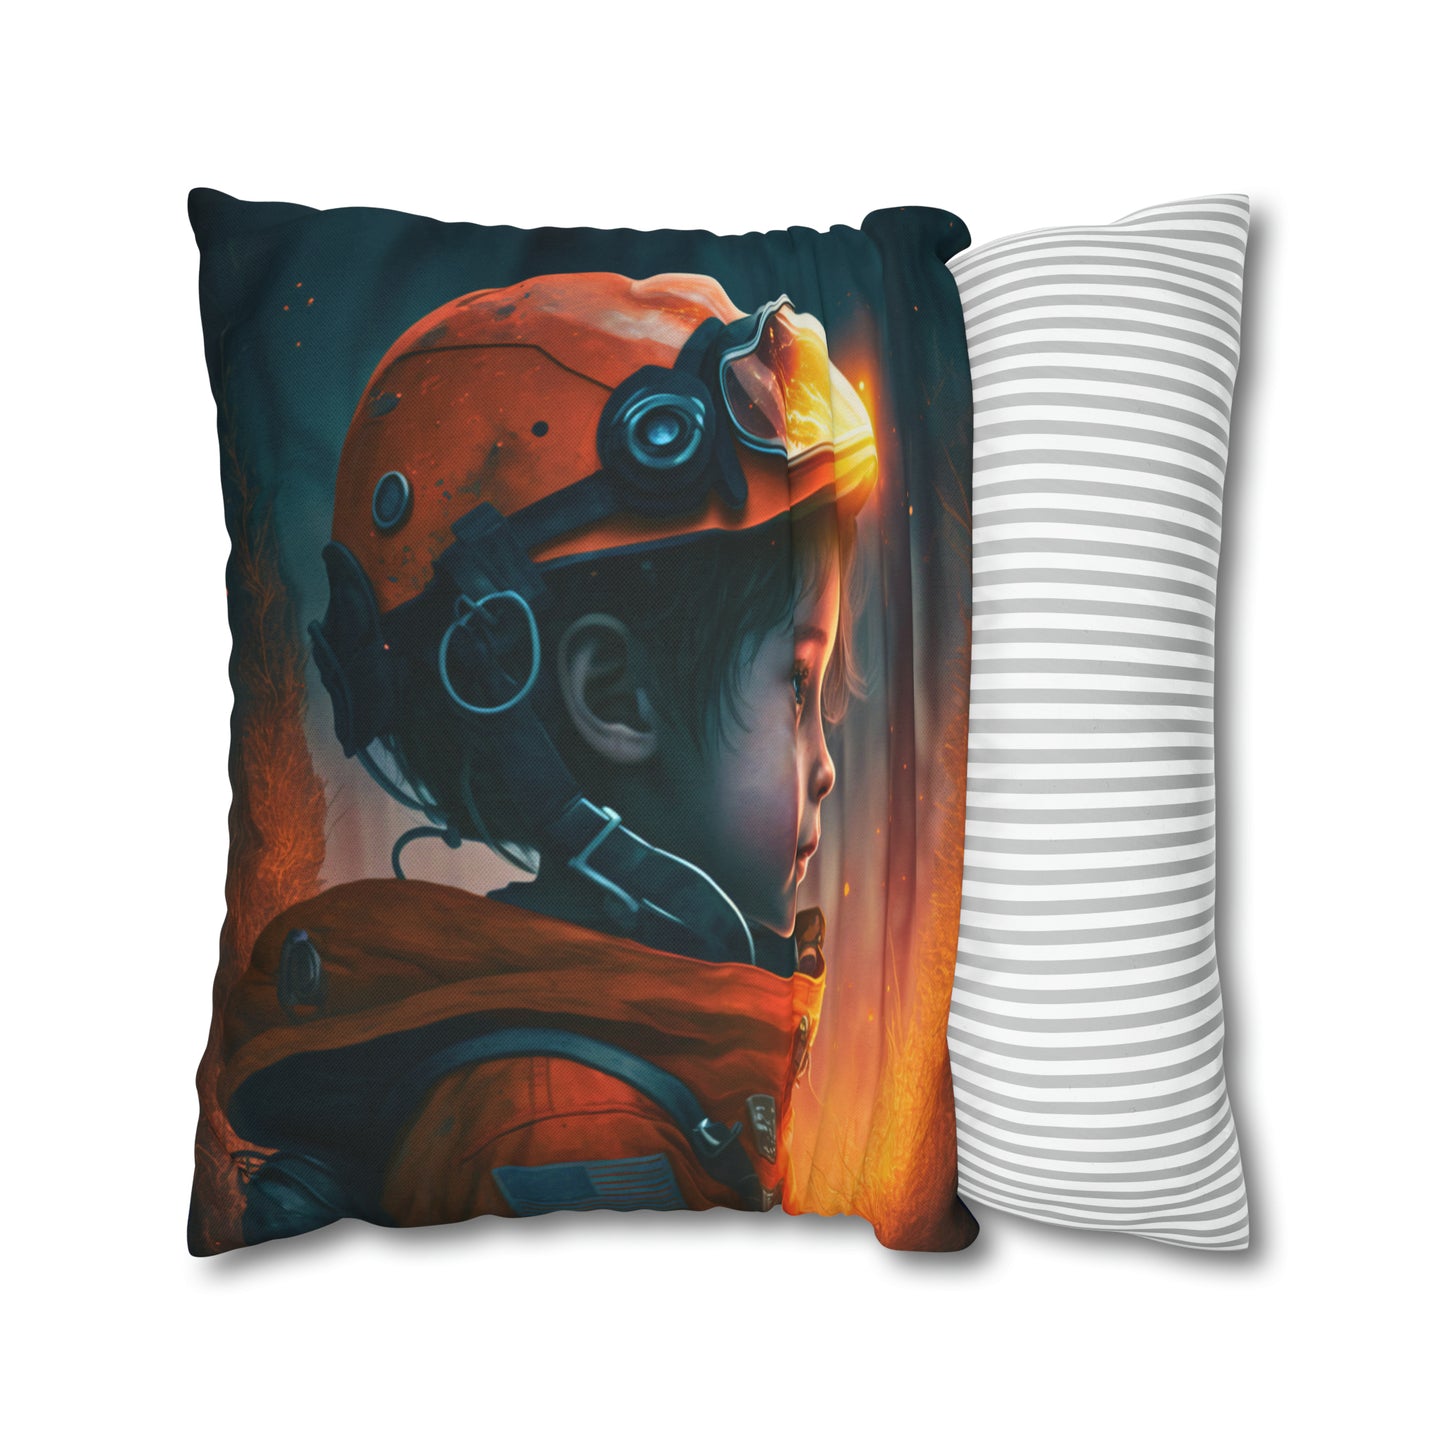 Square Pillow - Jimmy the Firefighter